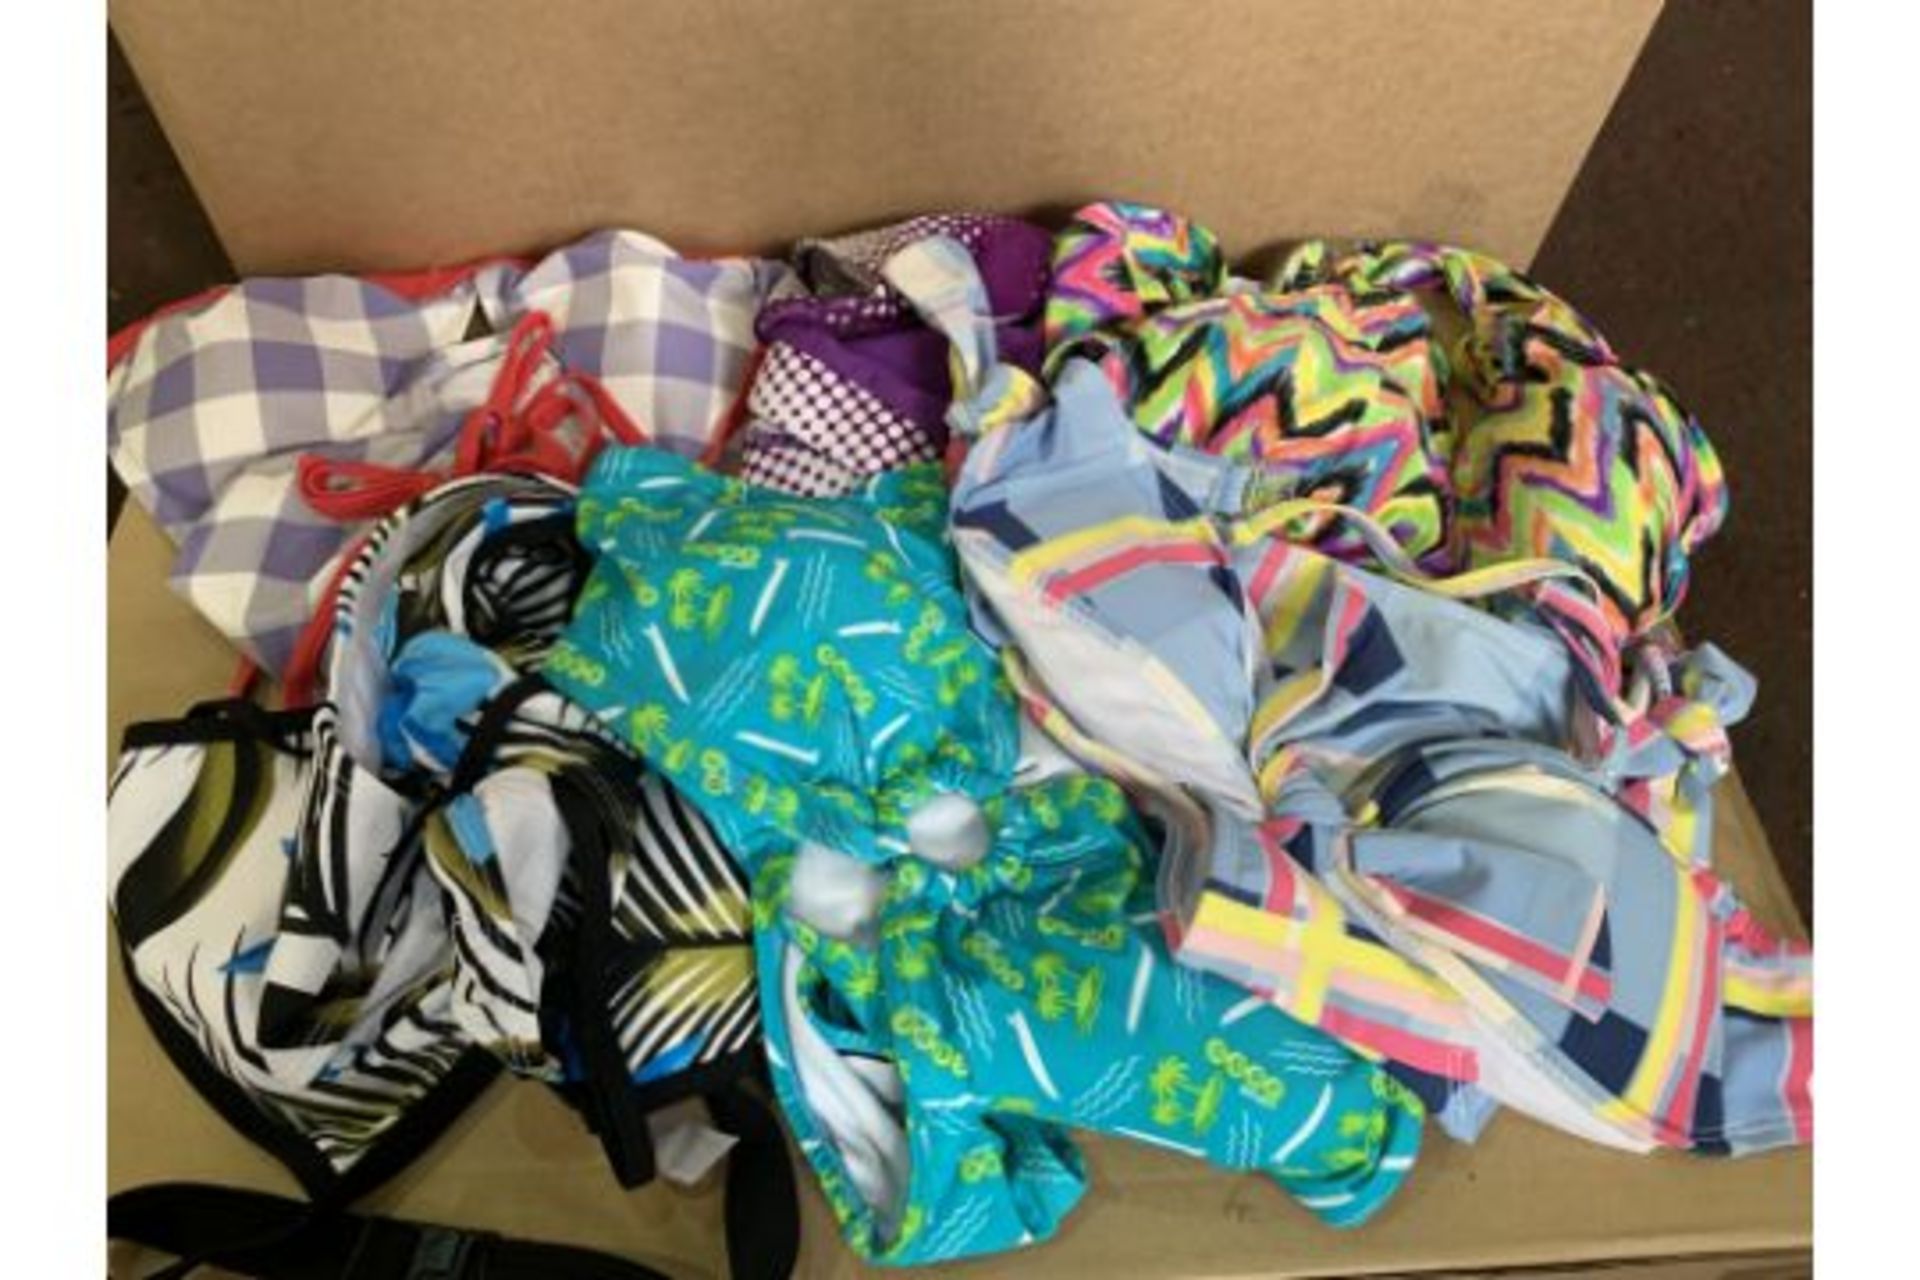 20 X BRAND NEW INDIVIDUALLY PACKAGED SWIMSUITS/BIKINI SETS IN VARIOUS STYLES (SIZES VARY 8-16)